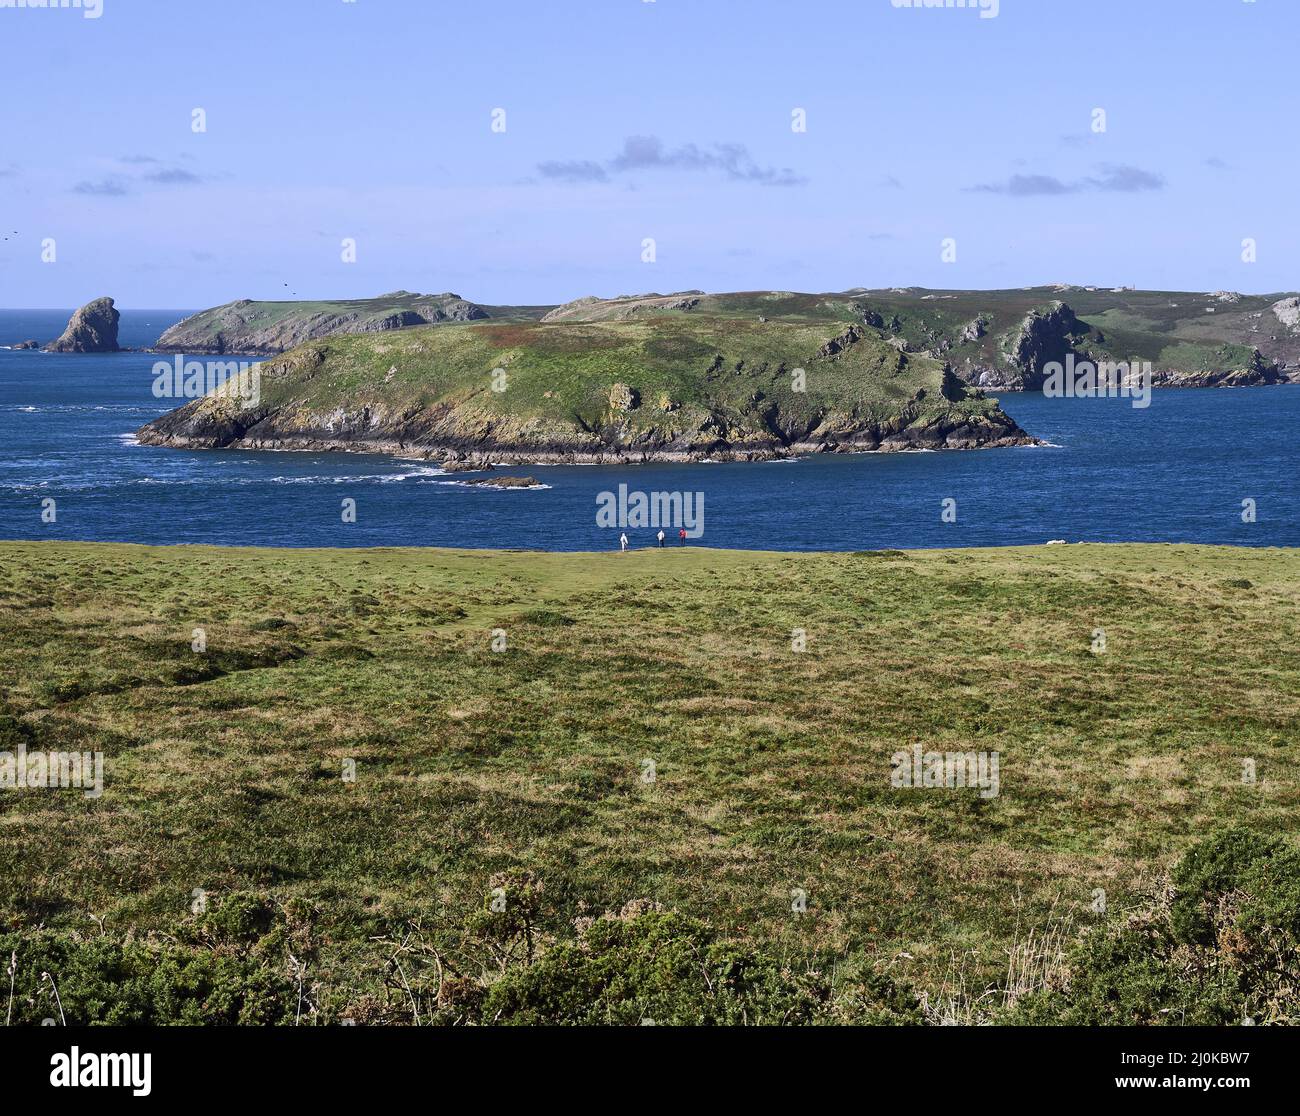 UK - South Wales - Wooltack Point Stock Photo